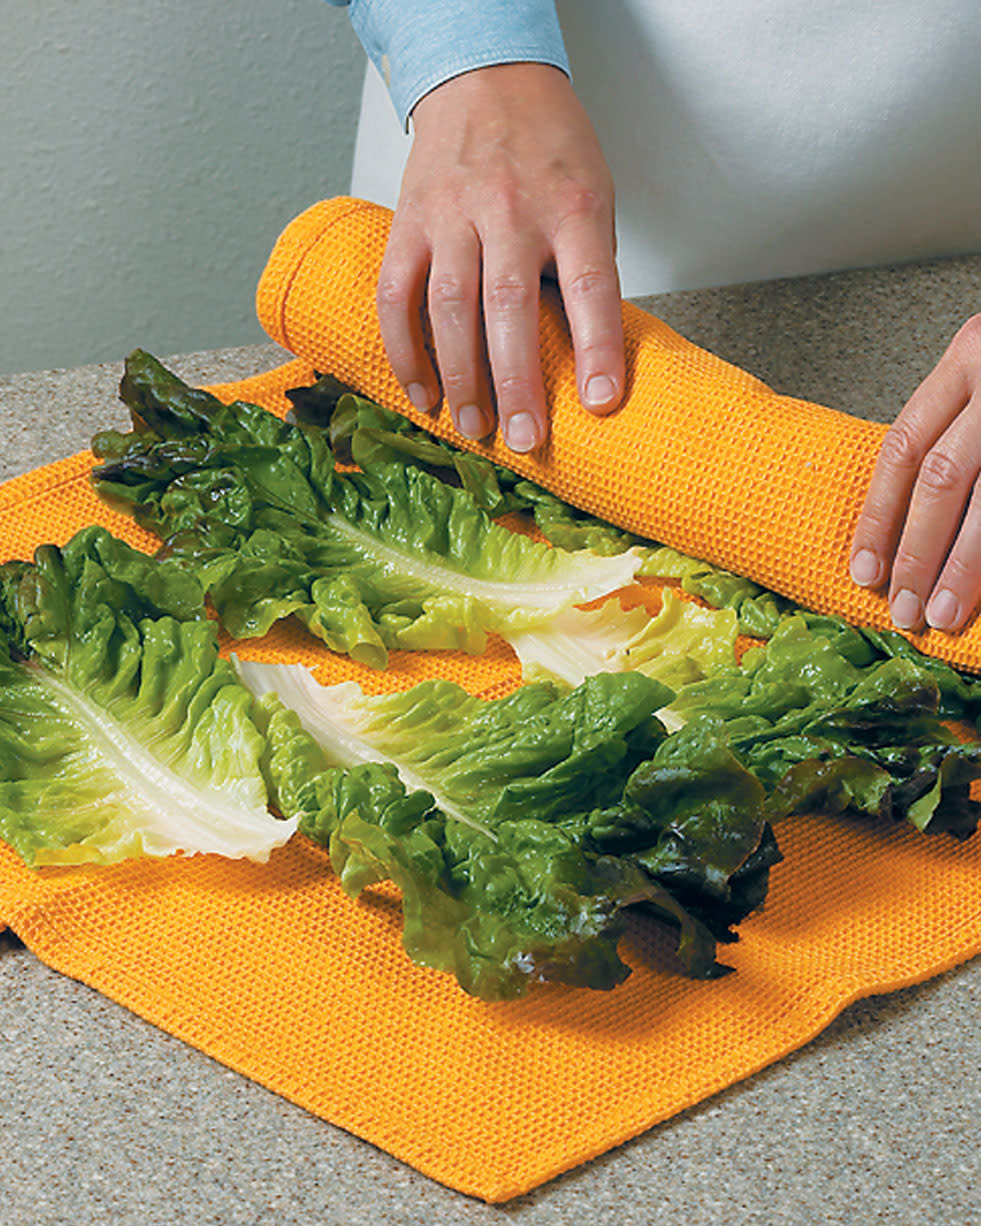 Roll Up Your Salad Greens to Keep Them Dry and Crisp